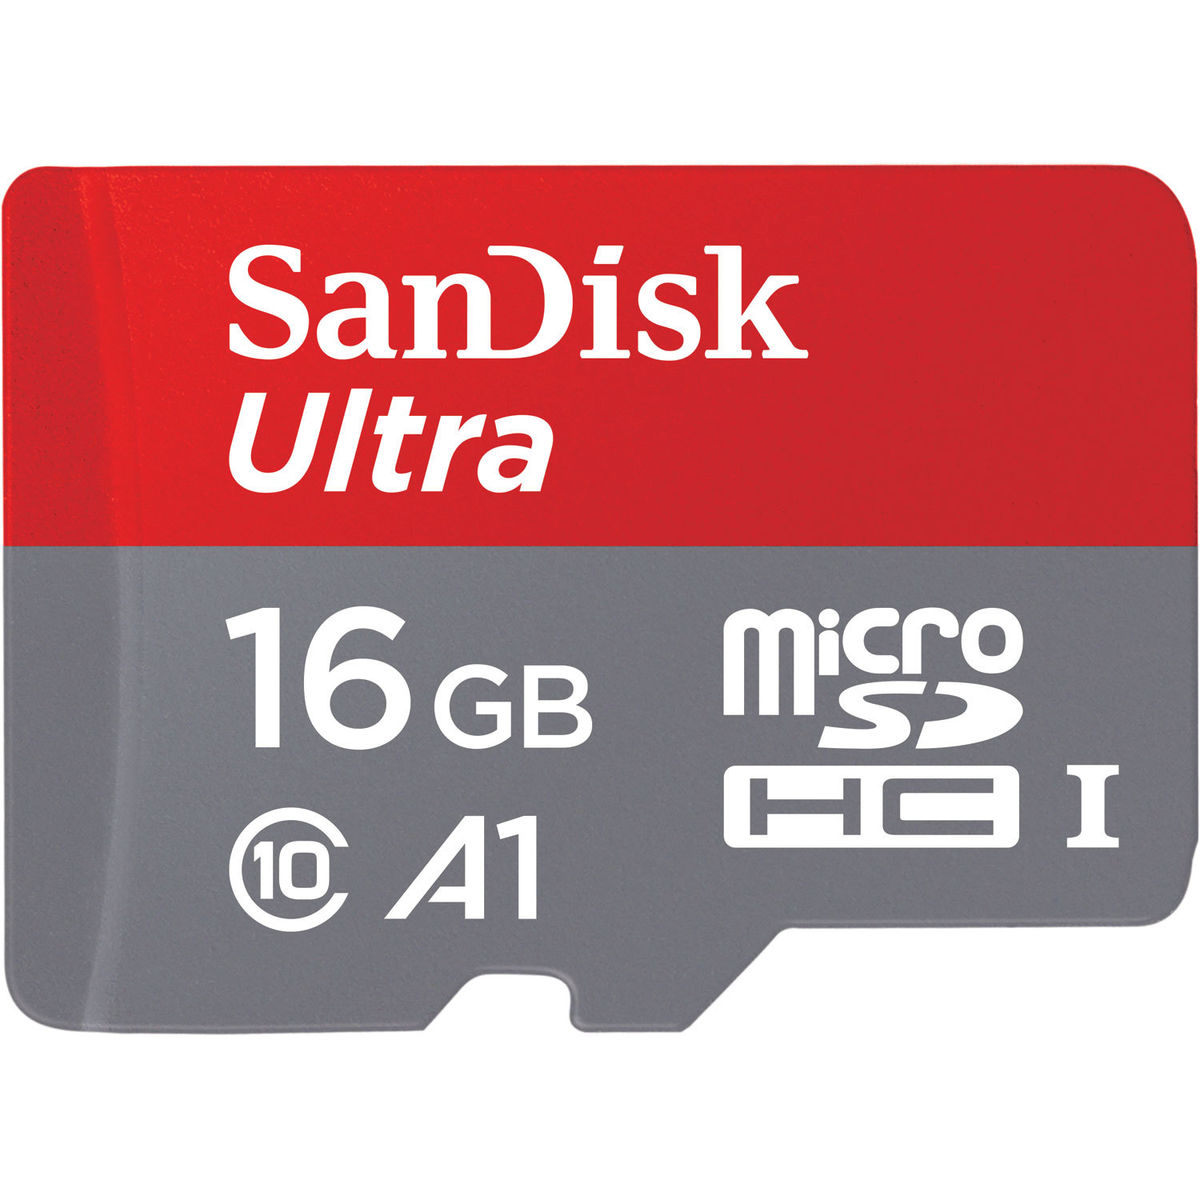 Sandisk Sandisk Ultra Android Microsdhc Pour Smartphone 16 Go Adaptateur Sd